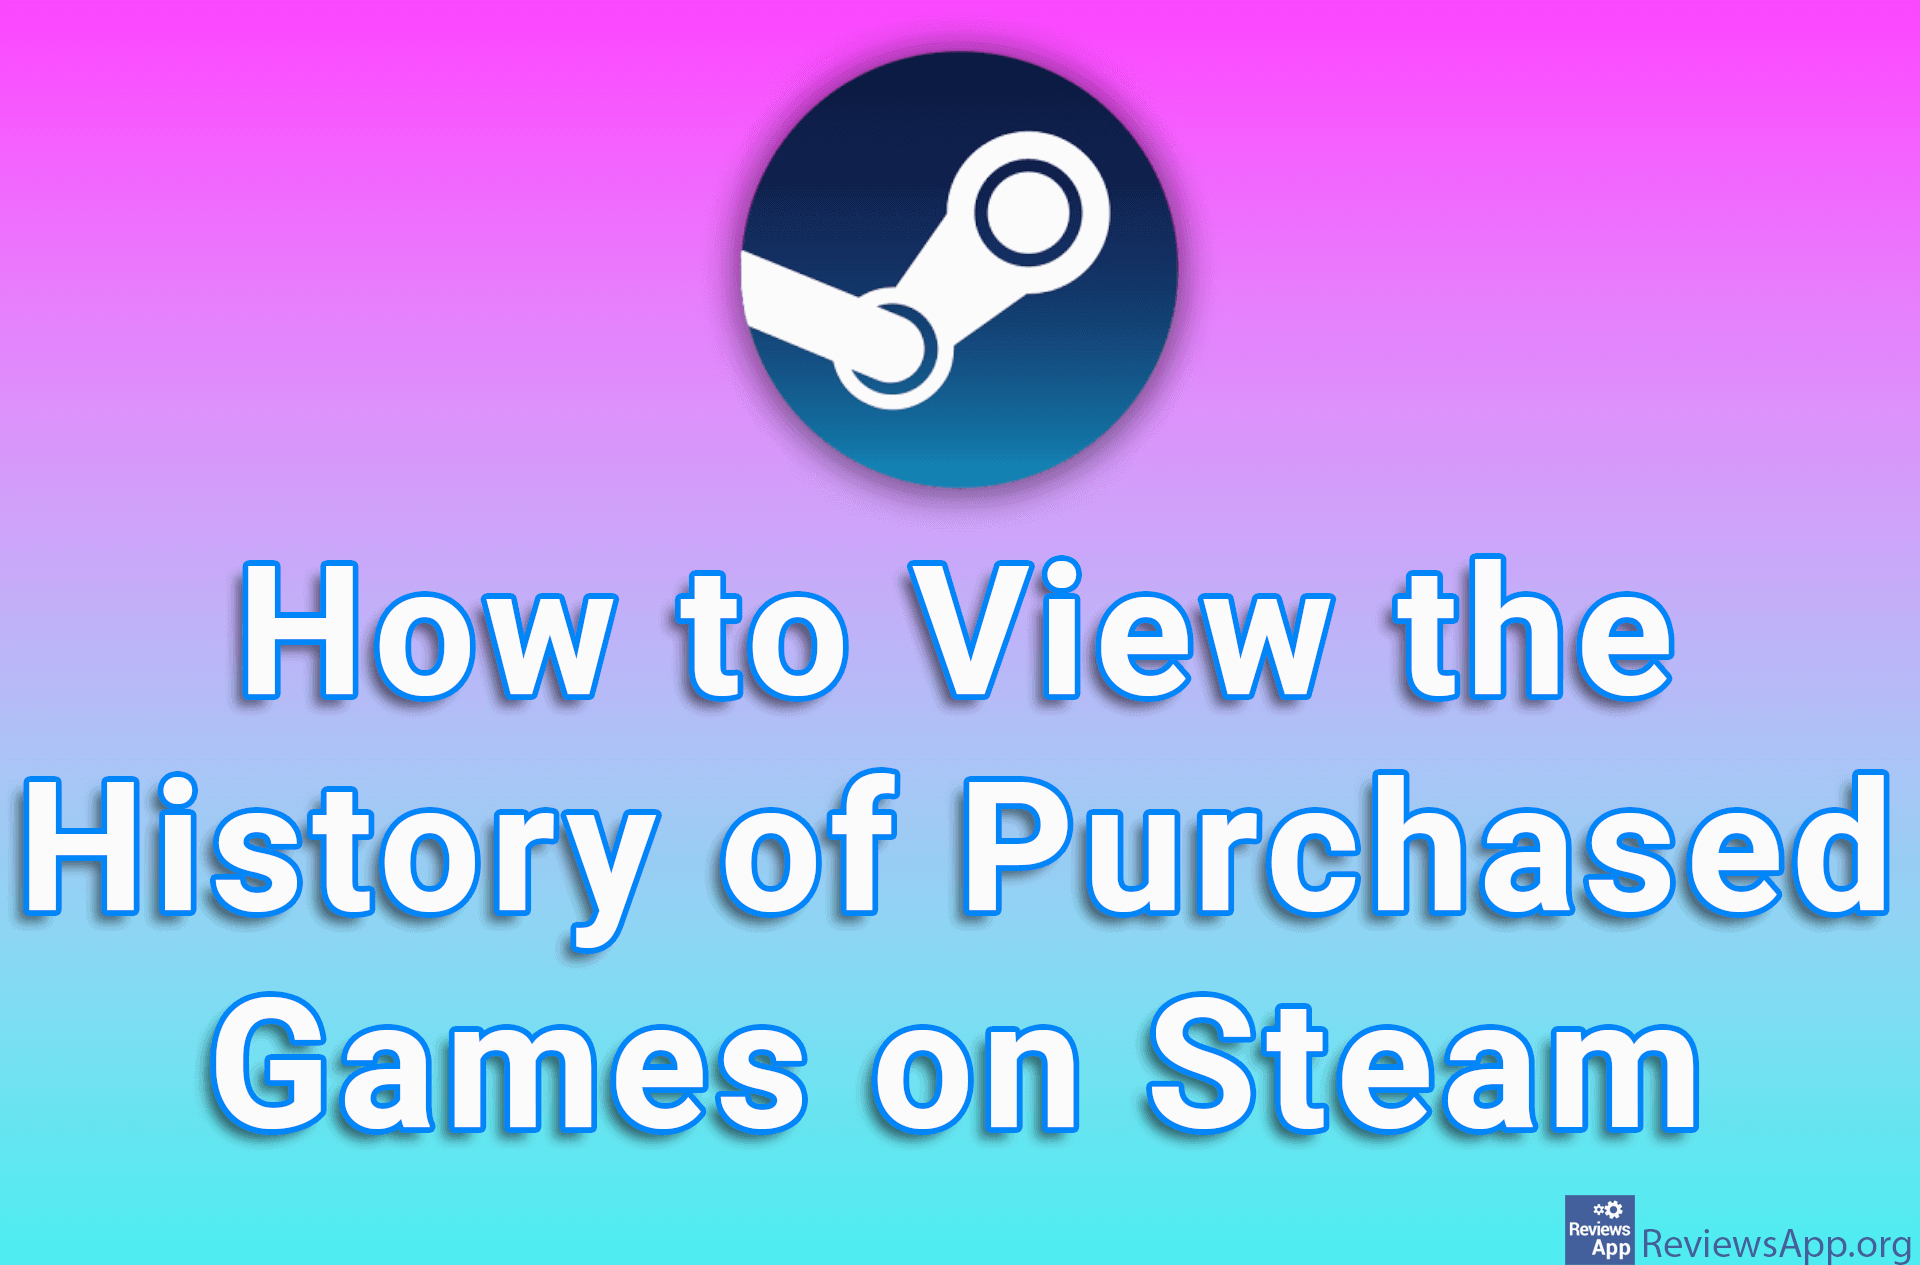 How to View the History of Purchased Games on Steam